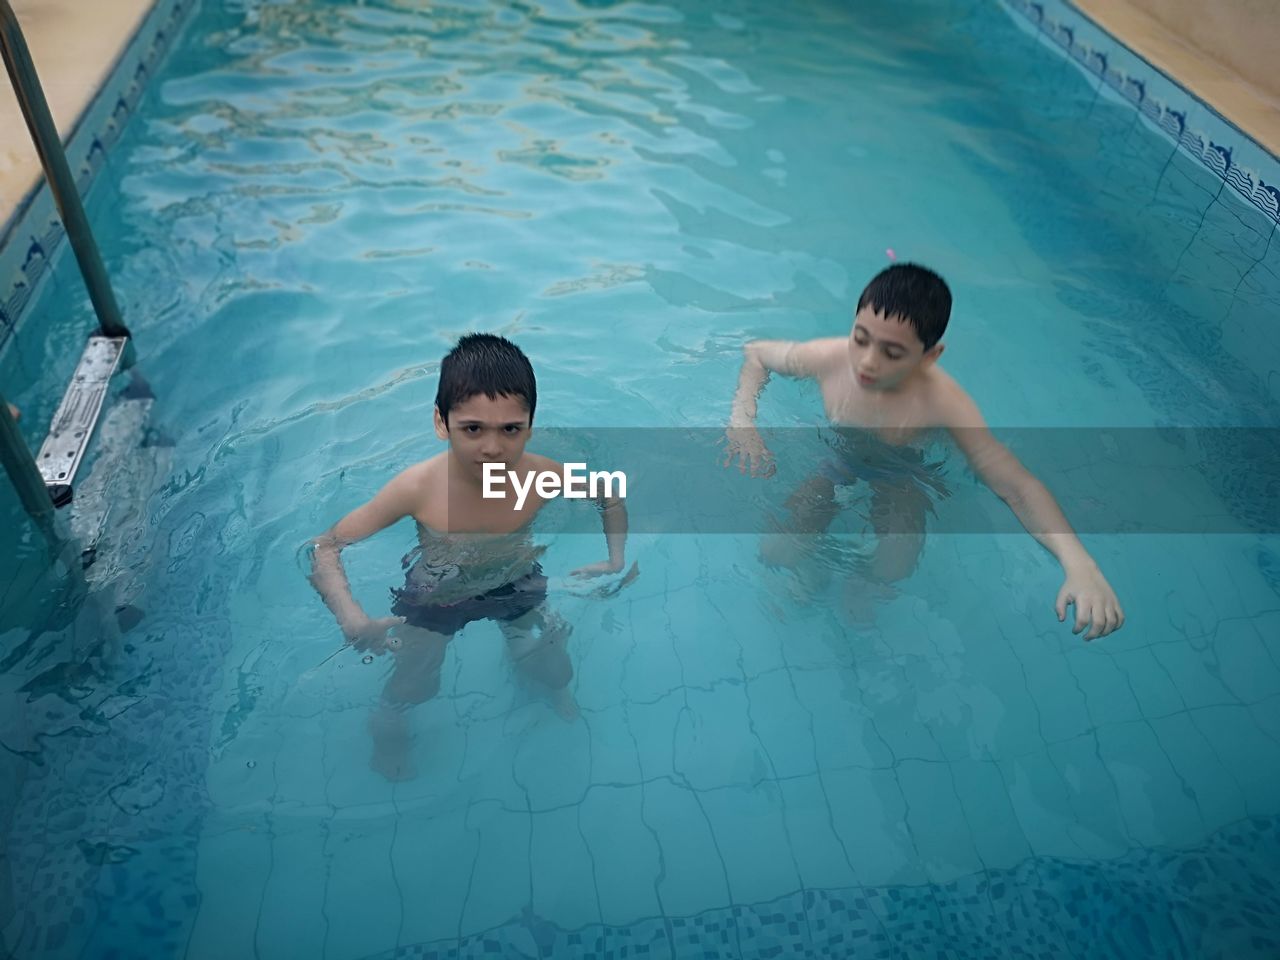 HIGH ANGLE VIEW OF SHIRTLESS BOY SWIMMING IN POOL